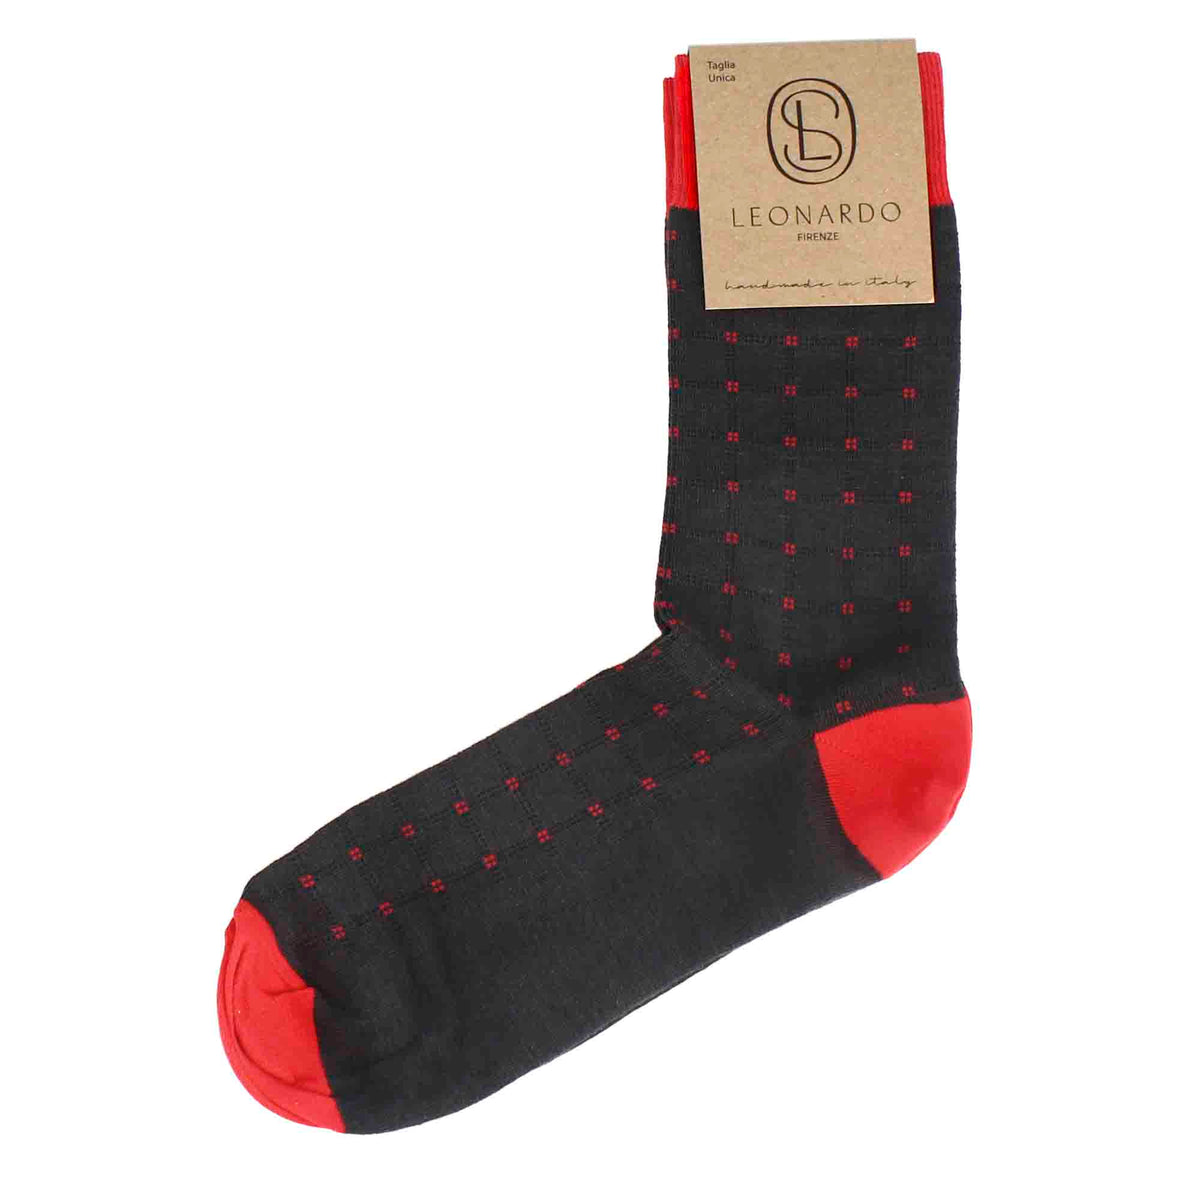 Men's grey cotton socks with red pattern